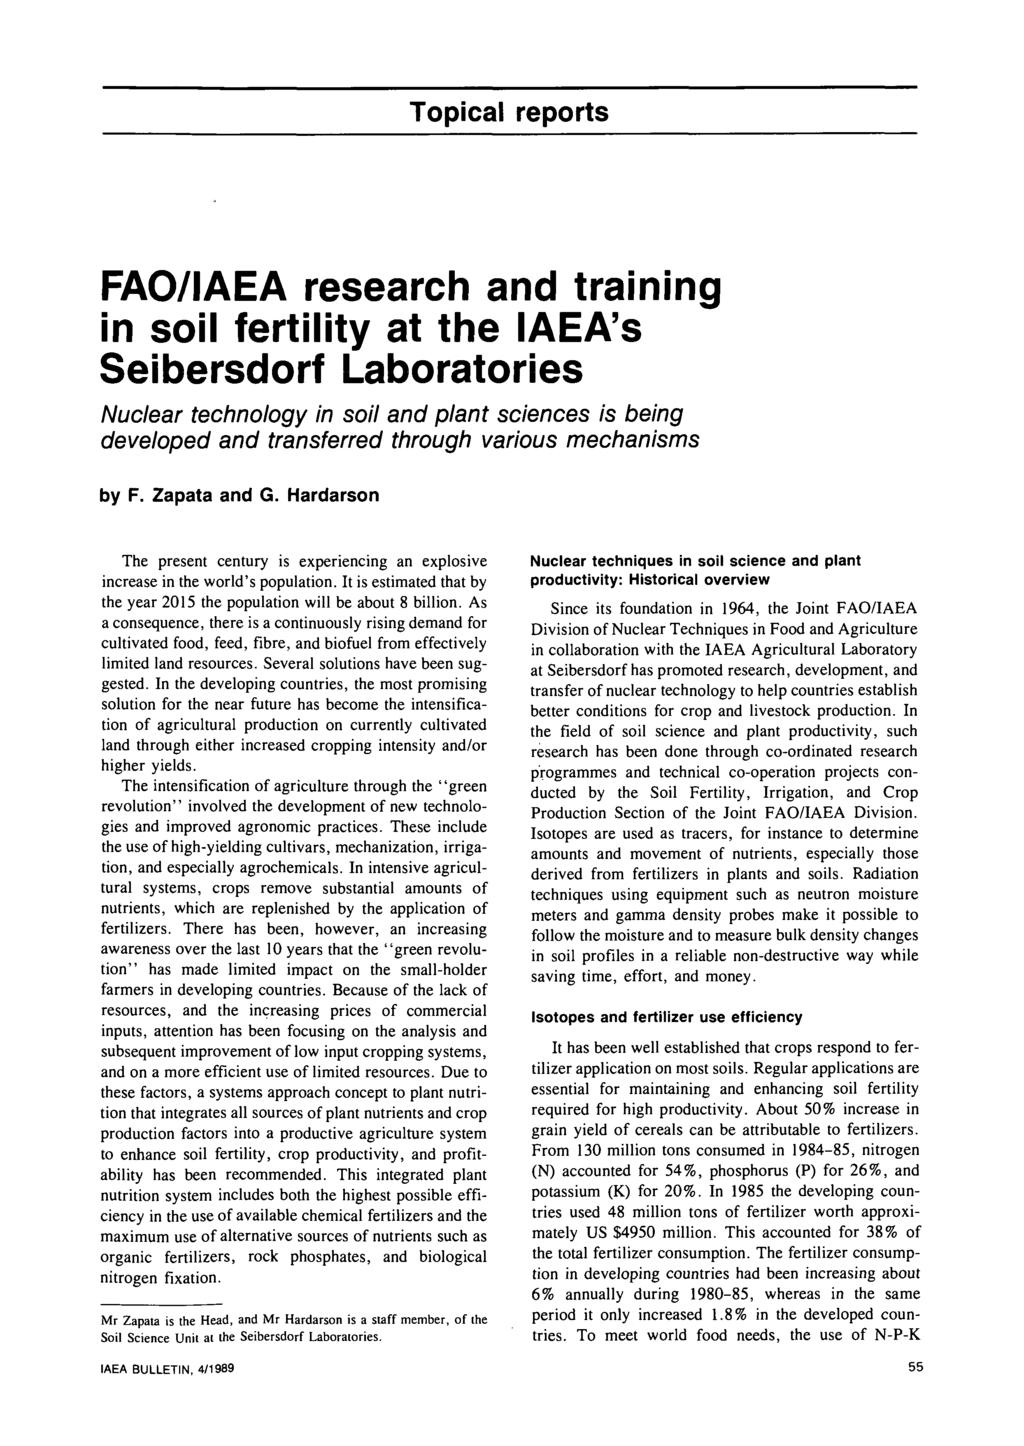 FAO/IAEA research and training in soil fertility at the IAEA's Seibersdorf Laboratories Nuclear technology in soil and plant sciences is being developed and transferred through various mechanisms by